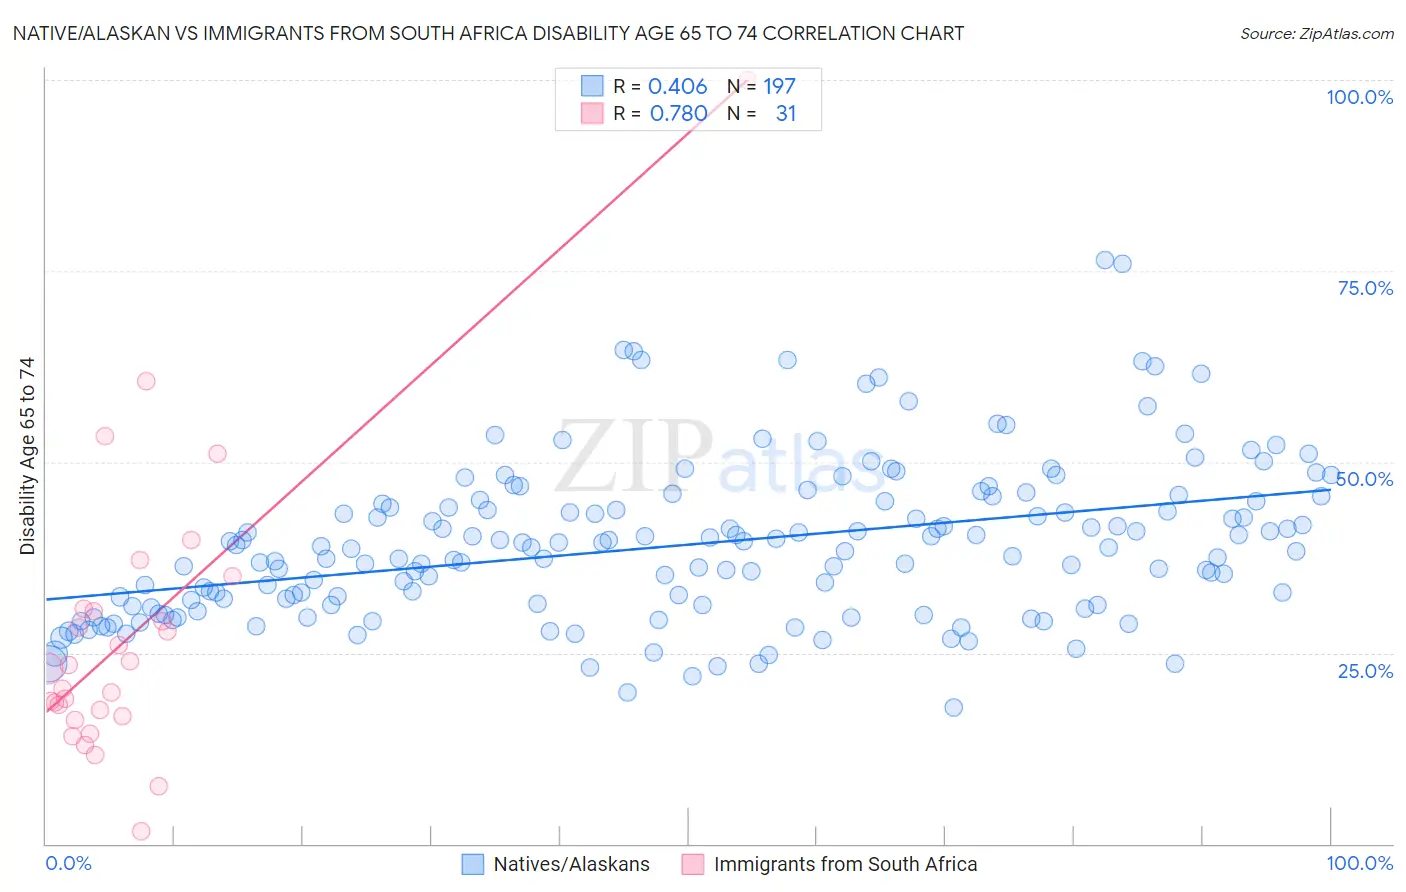 Native/Alaskan vs Immigrants from South Africa Disability Age 65 to 74